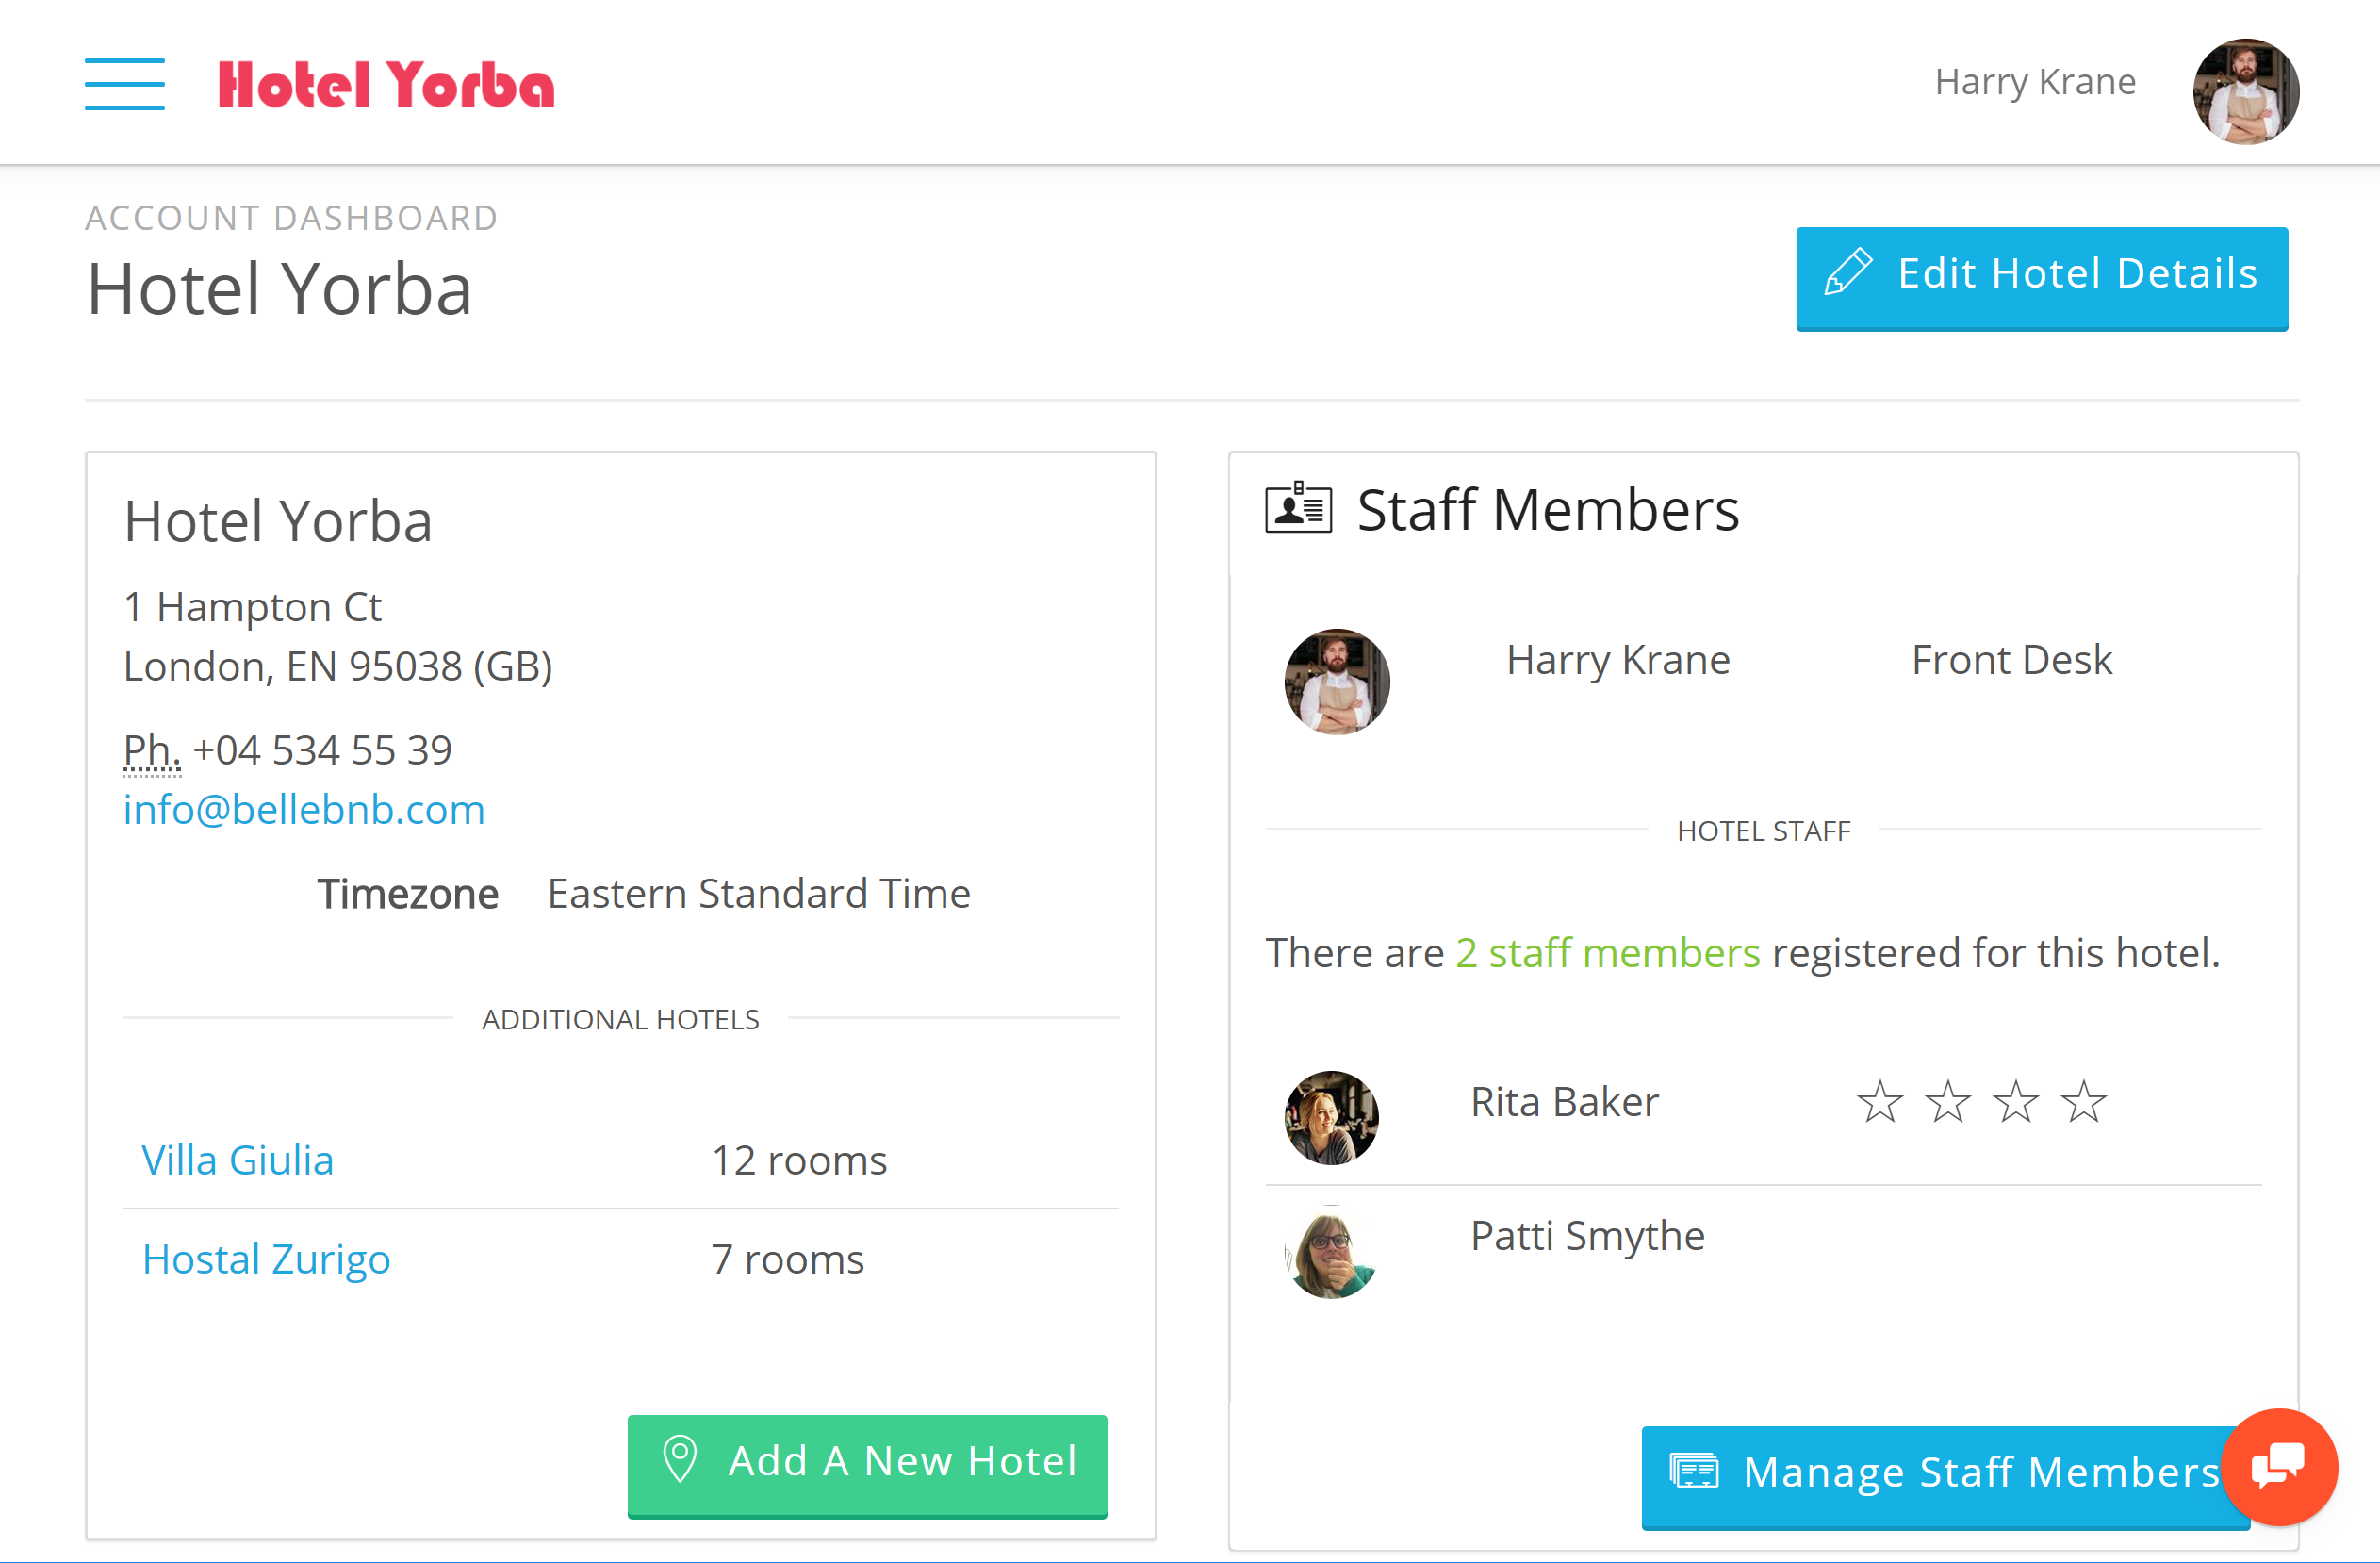 Group Hotel Management Software in the Cloud Bellebnb platform to accommodate hotel chains, groups, and agencies